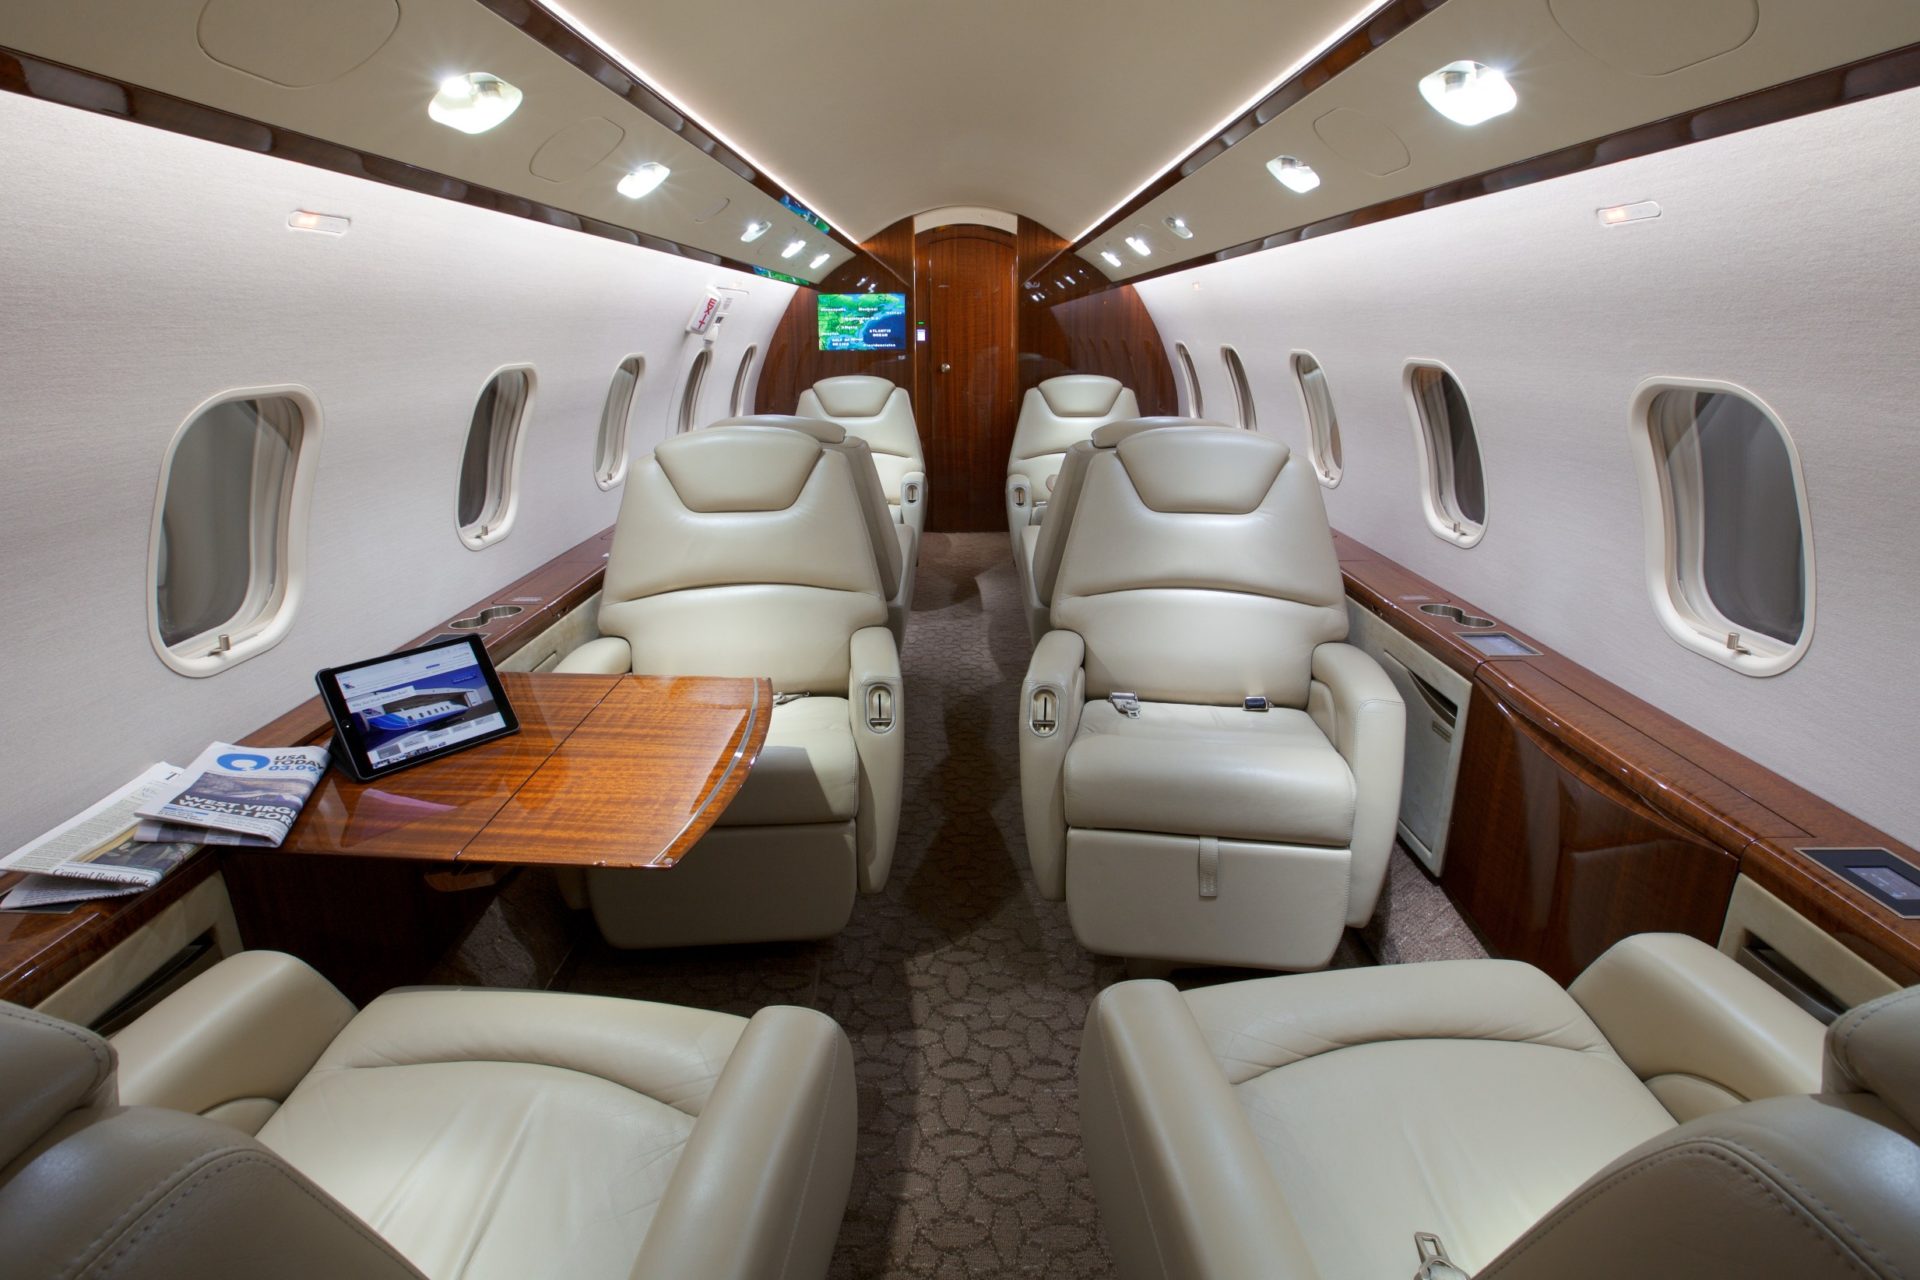 Cabin area with 8 reclining seats and tables